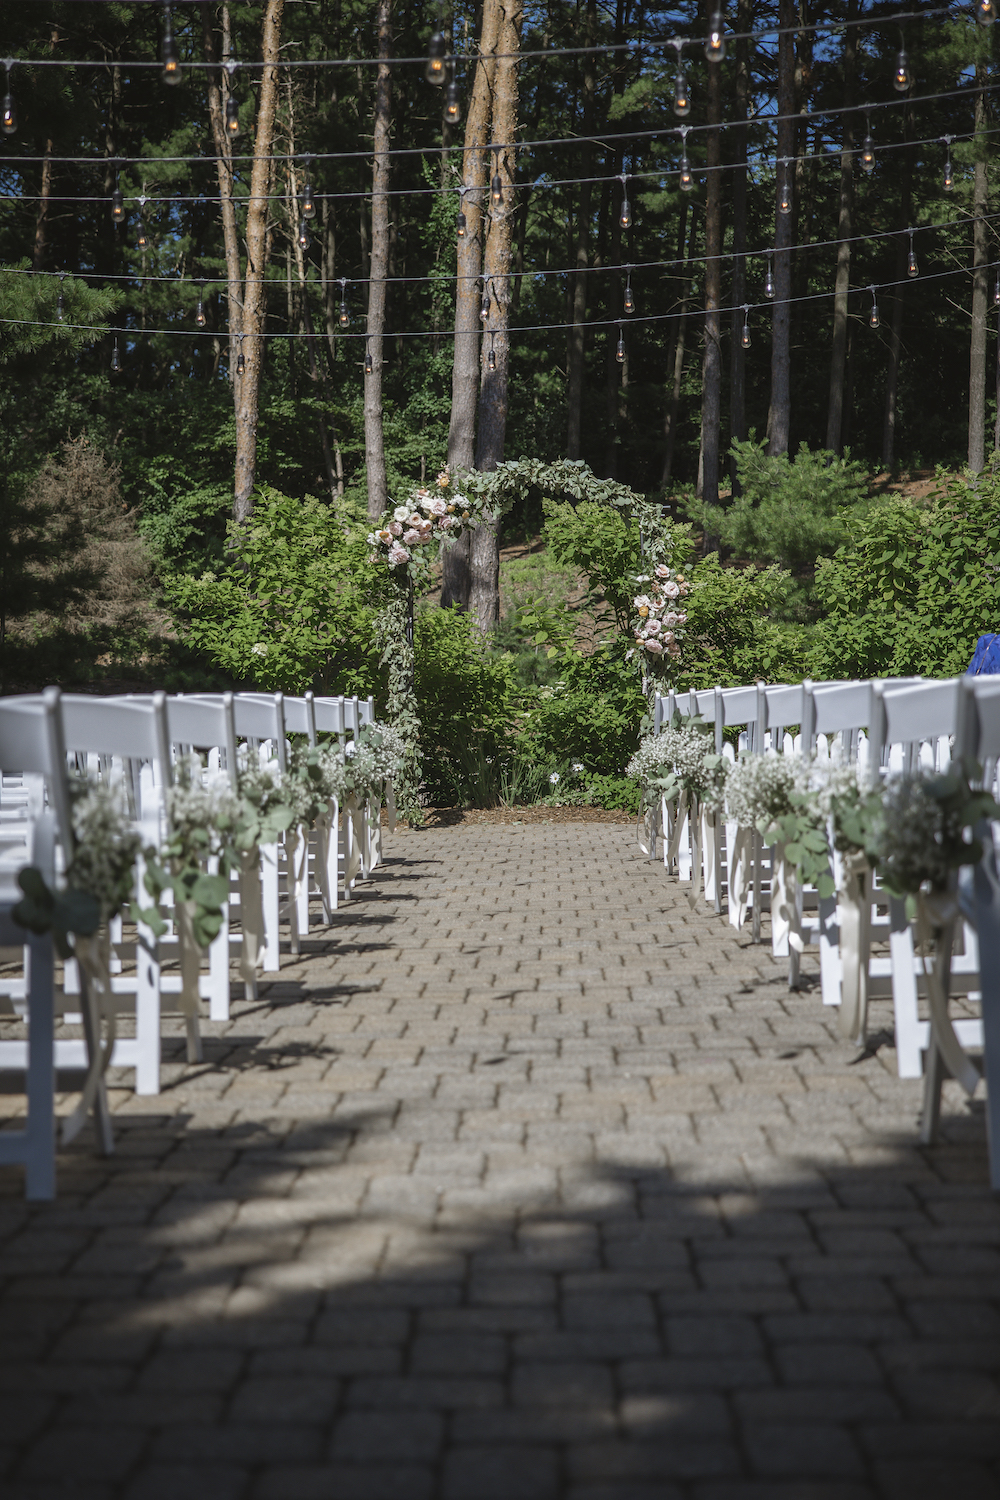 Wedding ceremony venue with rows of white chairs and a wedding arch at the end of the aisle, taken by Green Holly Photography